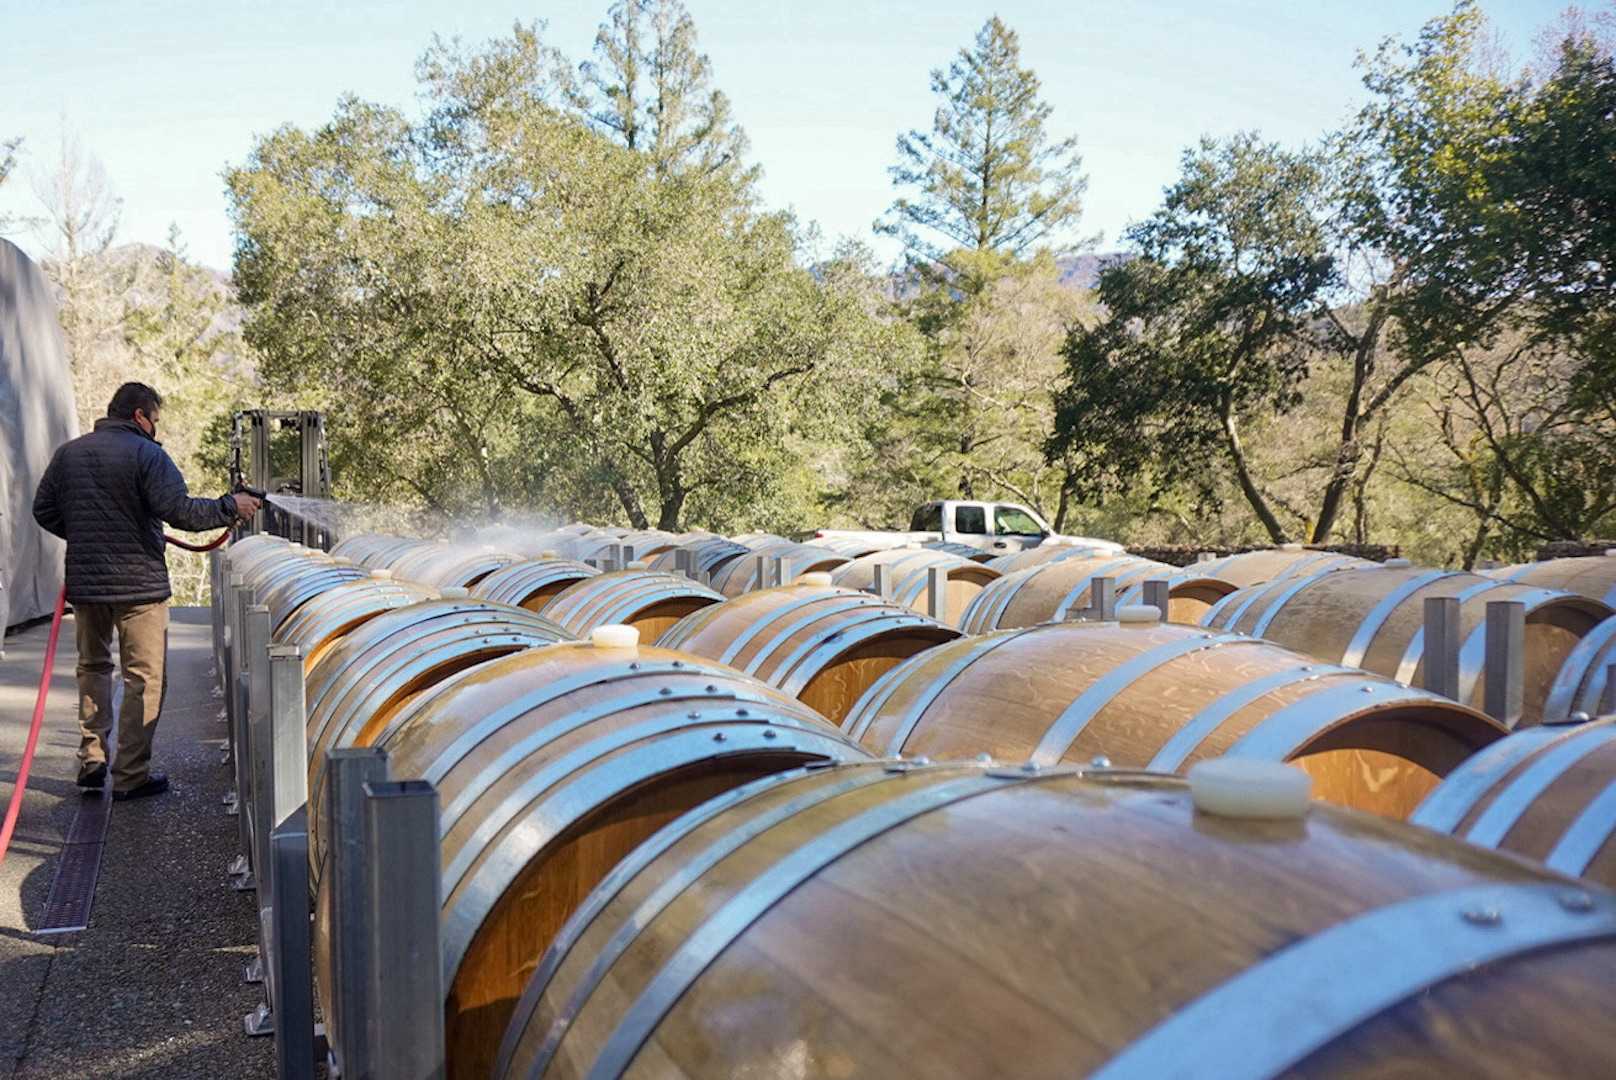 Olema and Amici Wine Barrels in a row